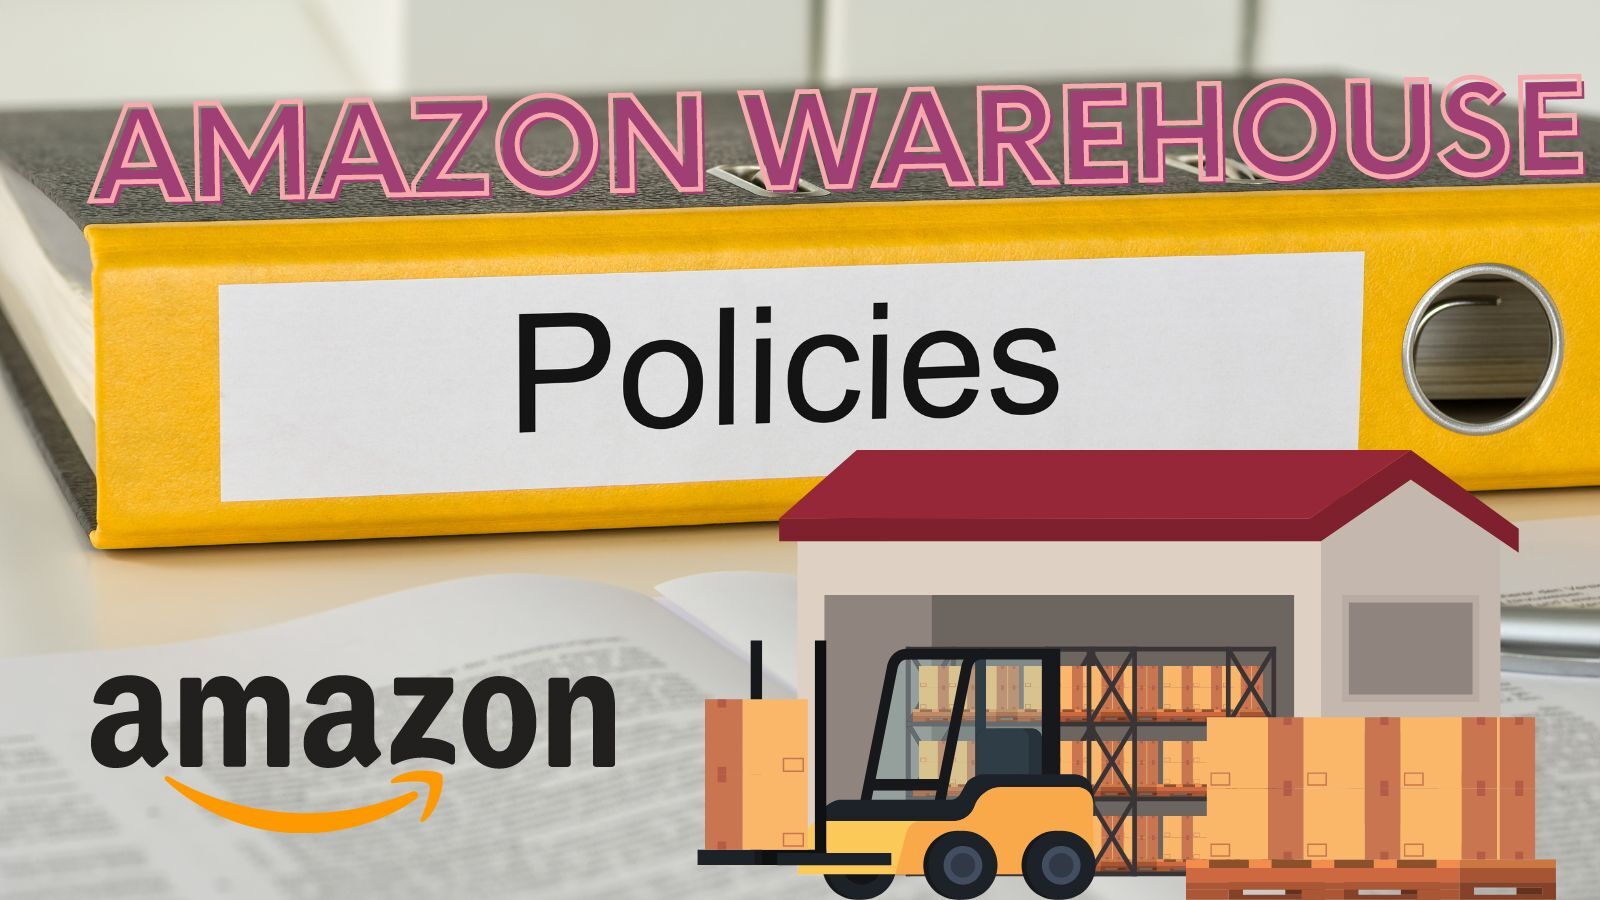 Amazon Warehouse Safety Policy (You'll Be Interested in This!)